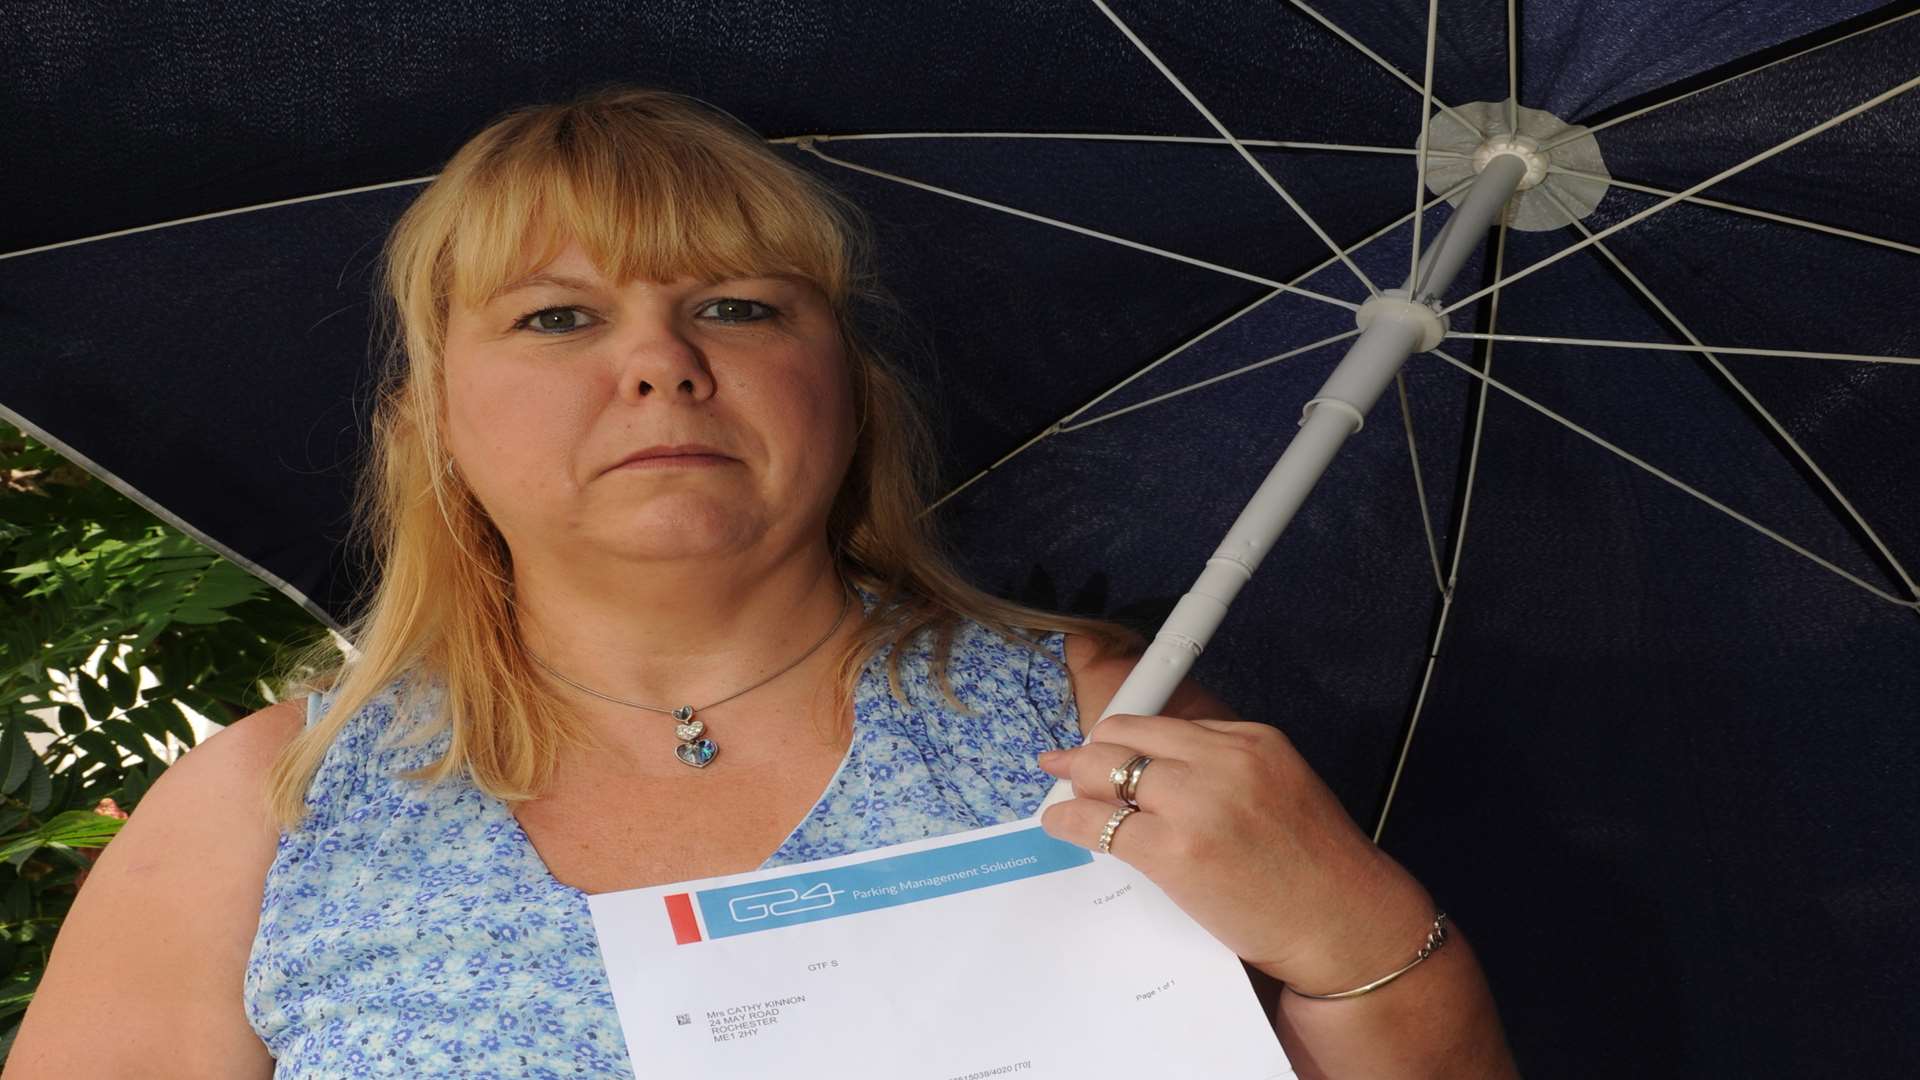 Cathy with her parasol and letter from the parking company